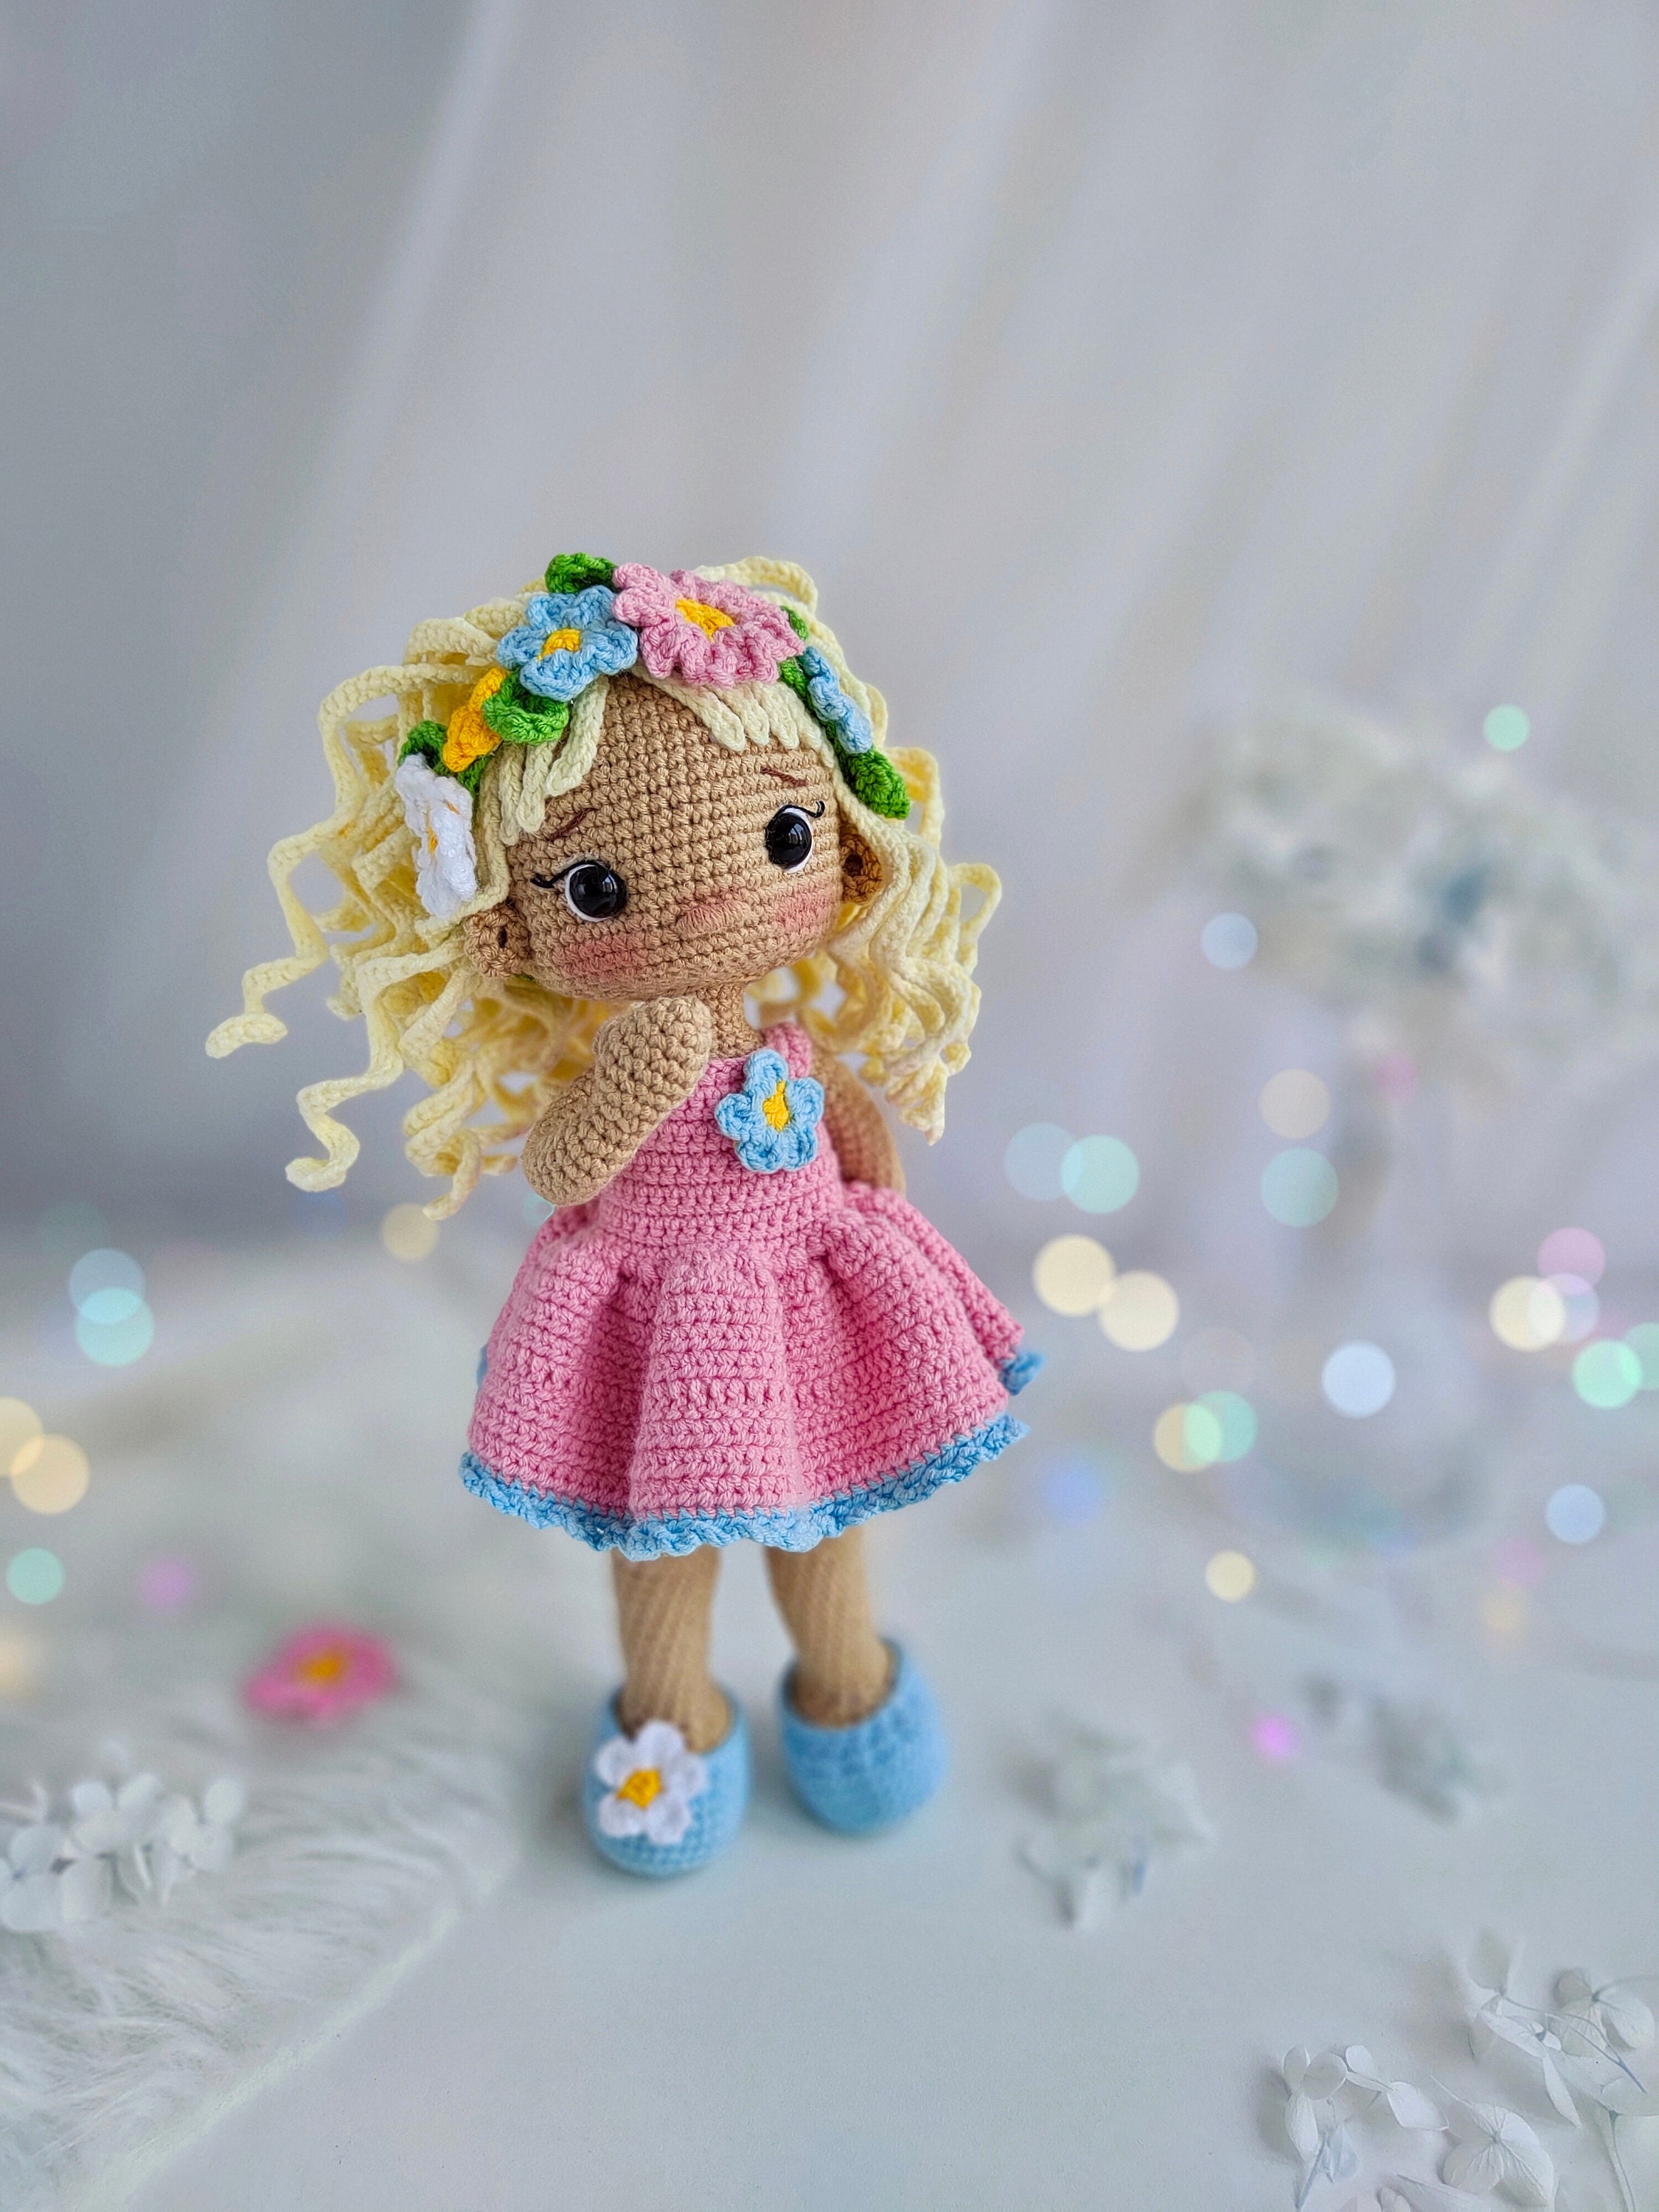 Crochet Doll Pattern With Clothes Emily, Amigurumi Doll Pattern 12